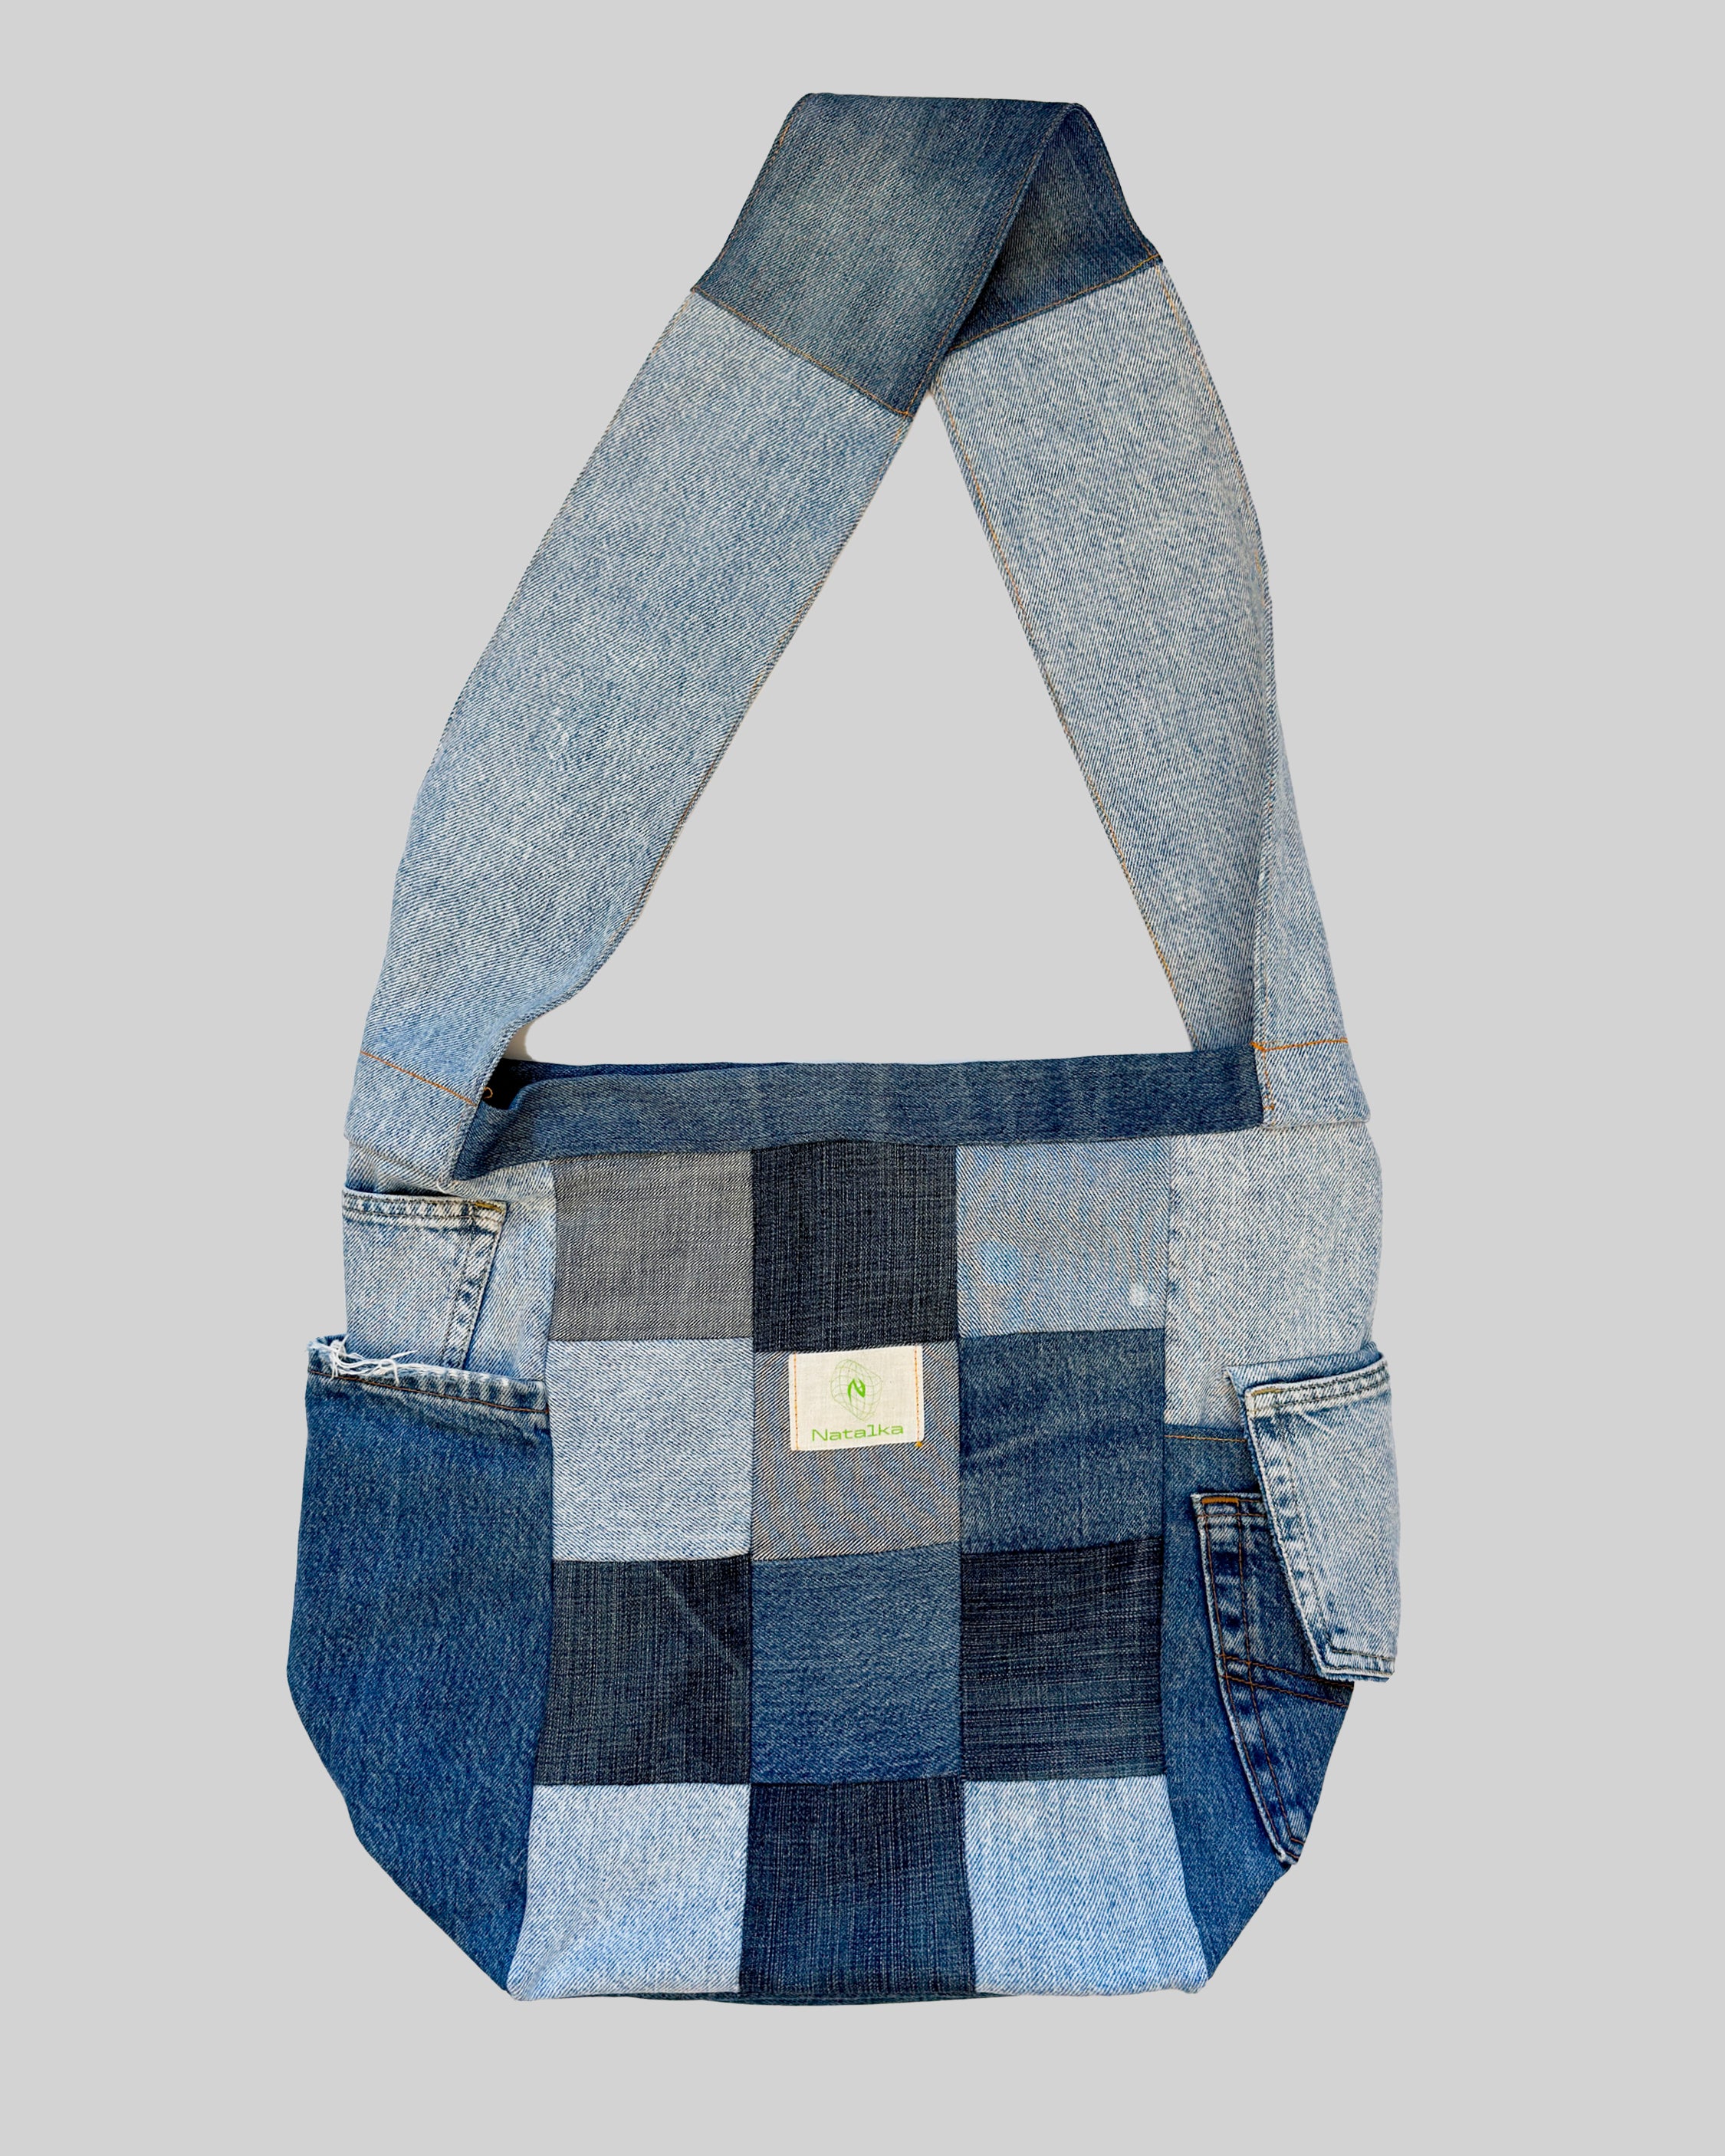 Buy wholesale 50 Recycled cotton - Denim bags - Made in Spain - Handmade